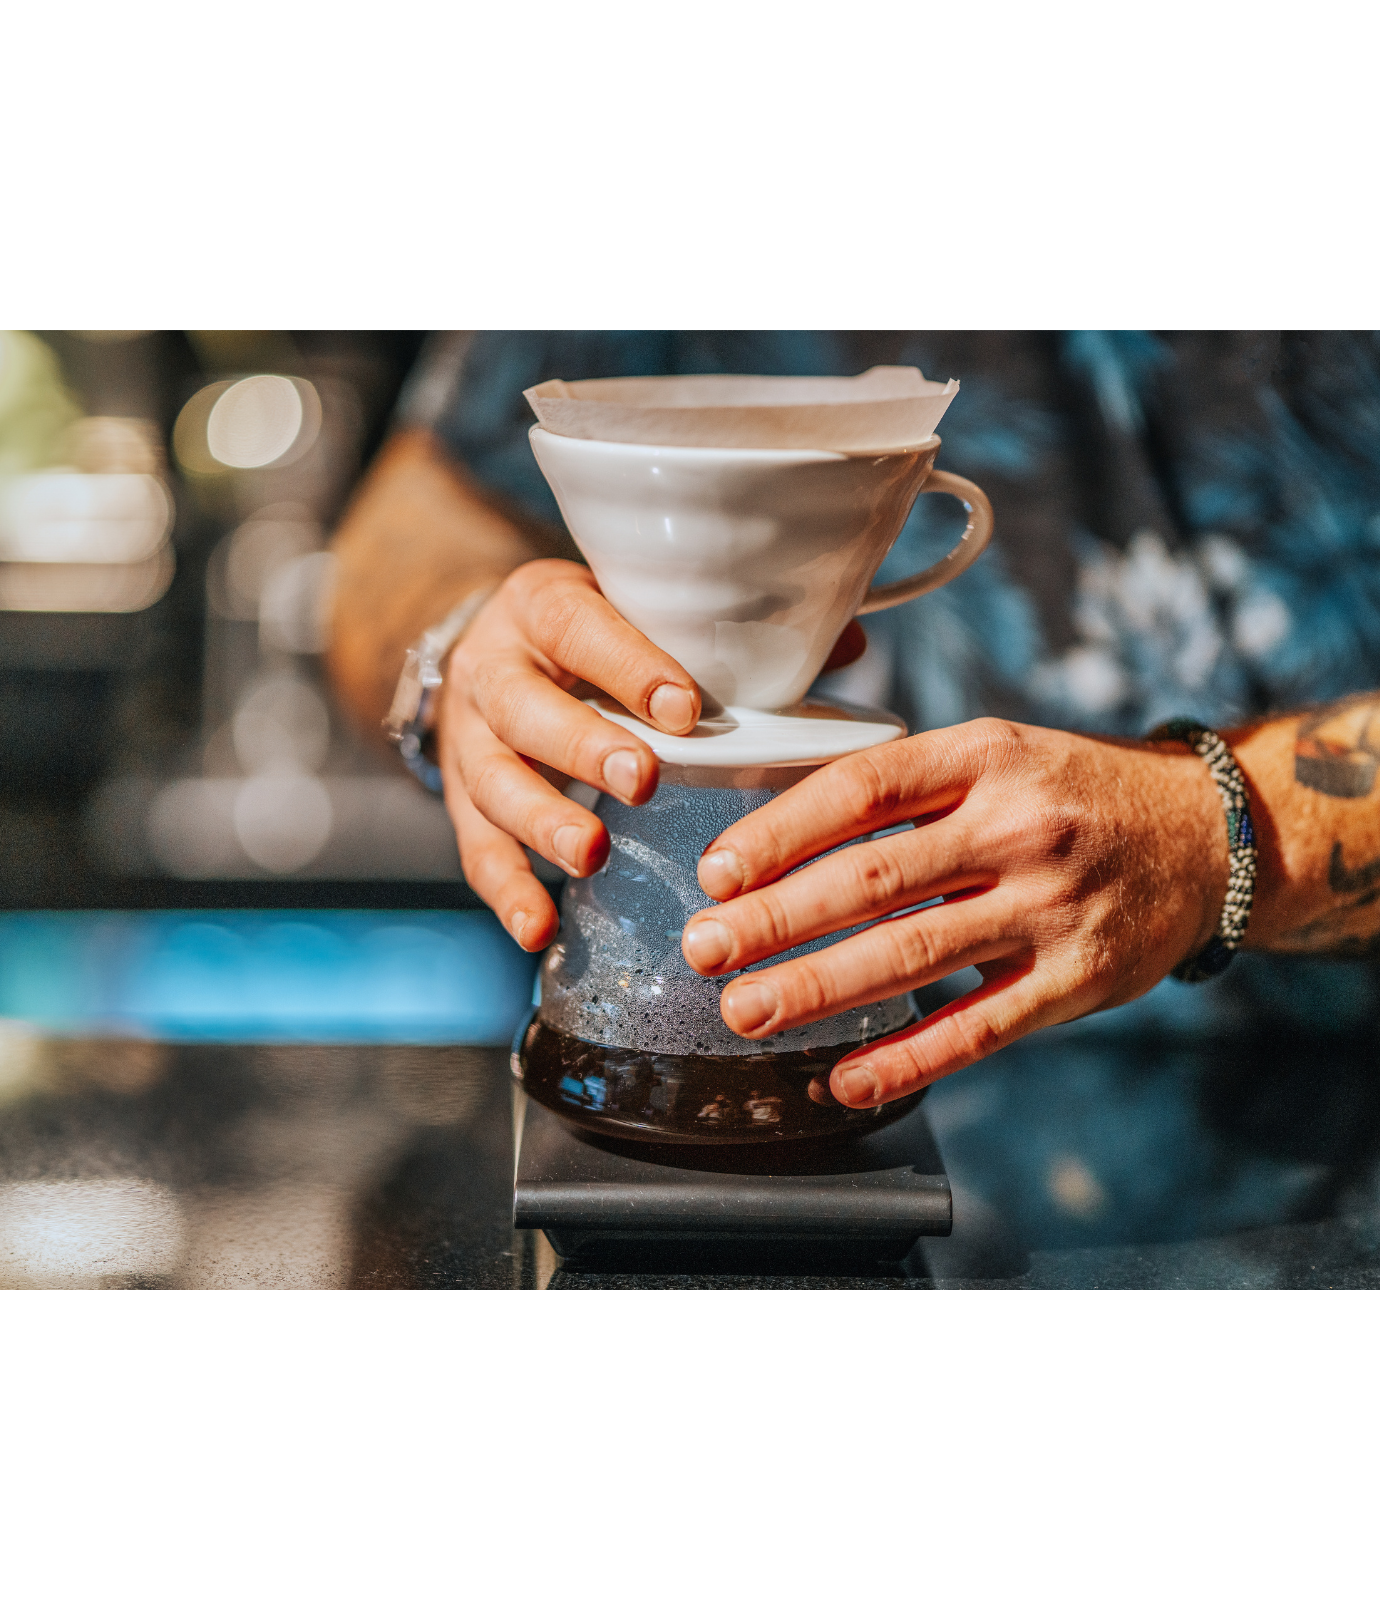 HOW TO BREW A HARIO V60